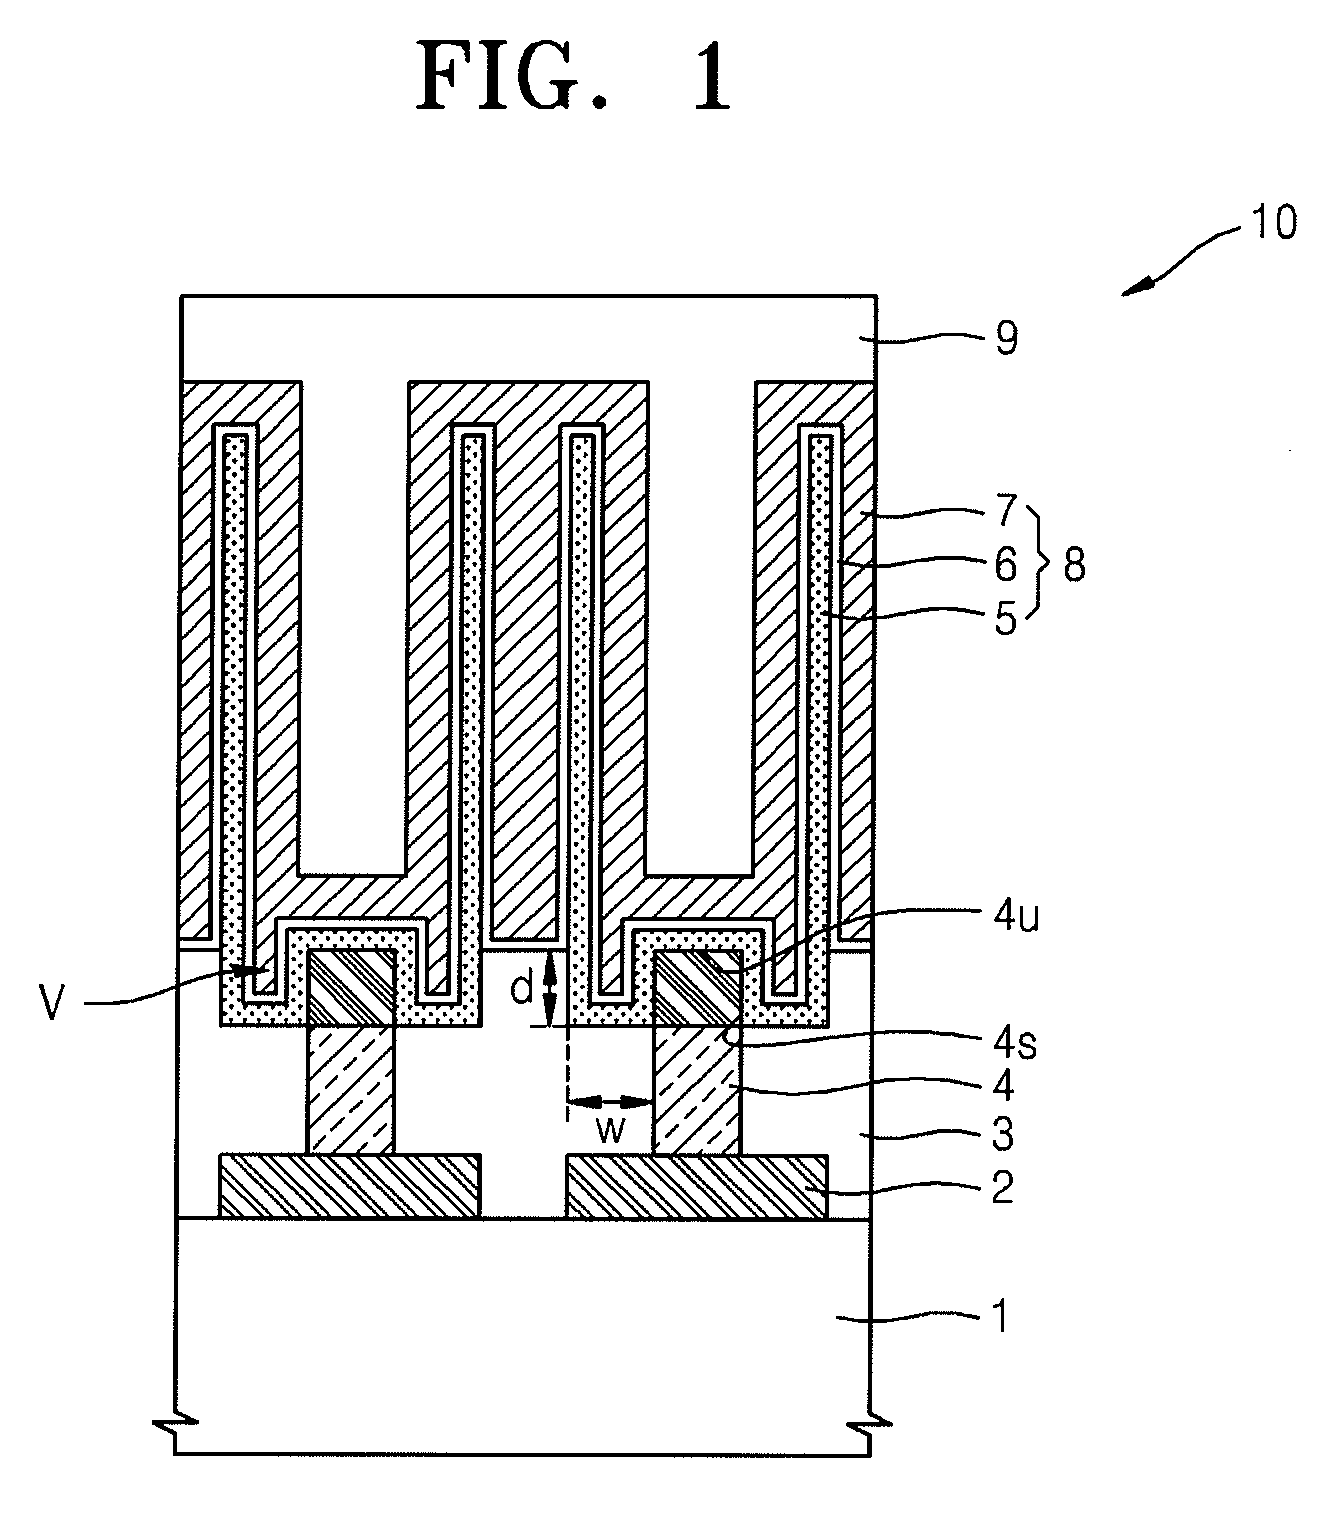 Semiconductor memory device including a cylinder type storage node and a method of fabricating the same